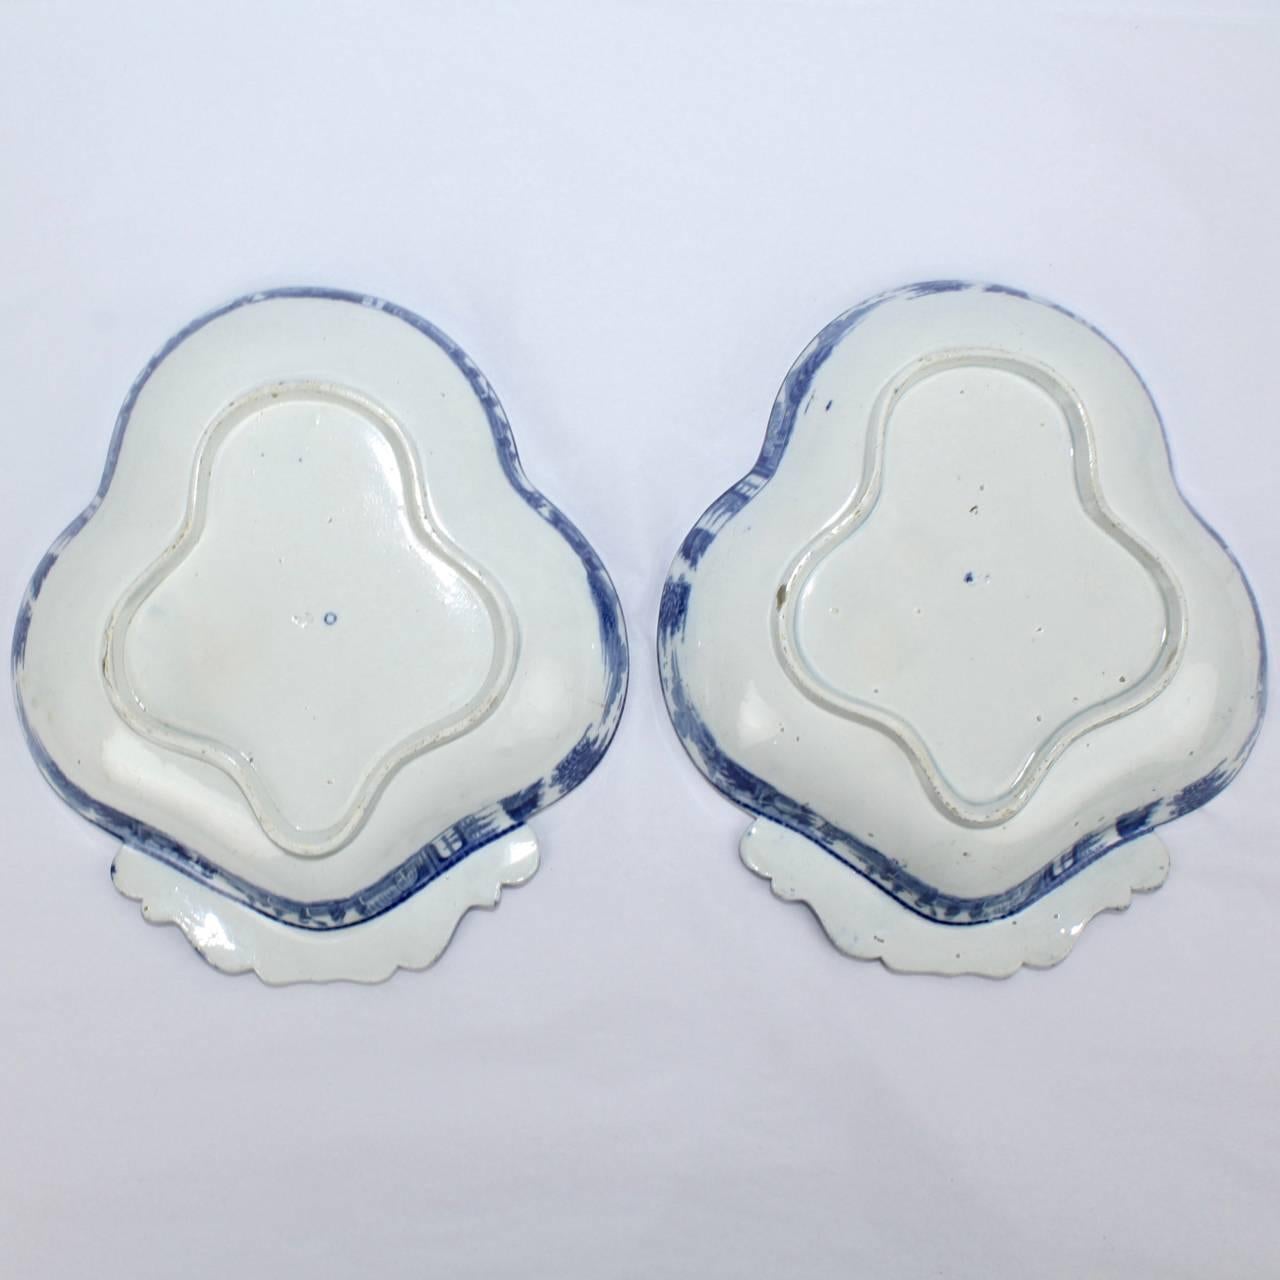 A rare pair of early English soft-paste porcelain shrimp dishes.

With finely detailed blue transferware decoration depicting a Chinoiserie scene of Chinese palaces, balcony, horses and figures.

Likely manufactured by Clews or Spode.

Marked